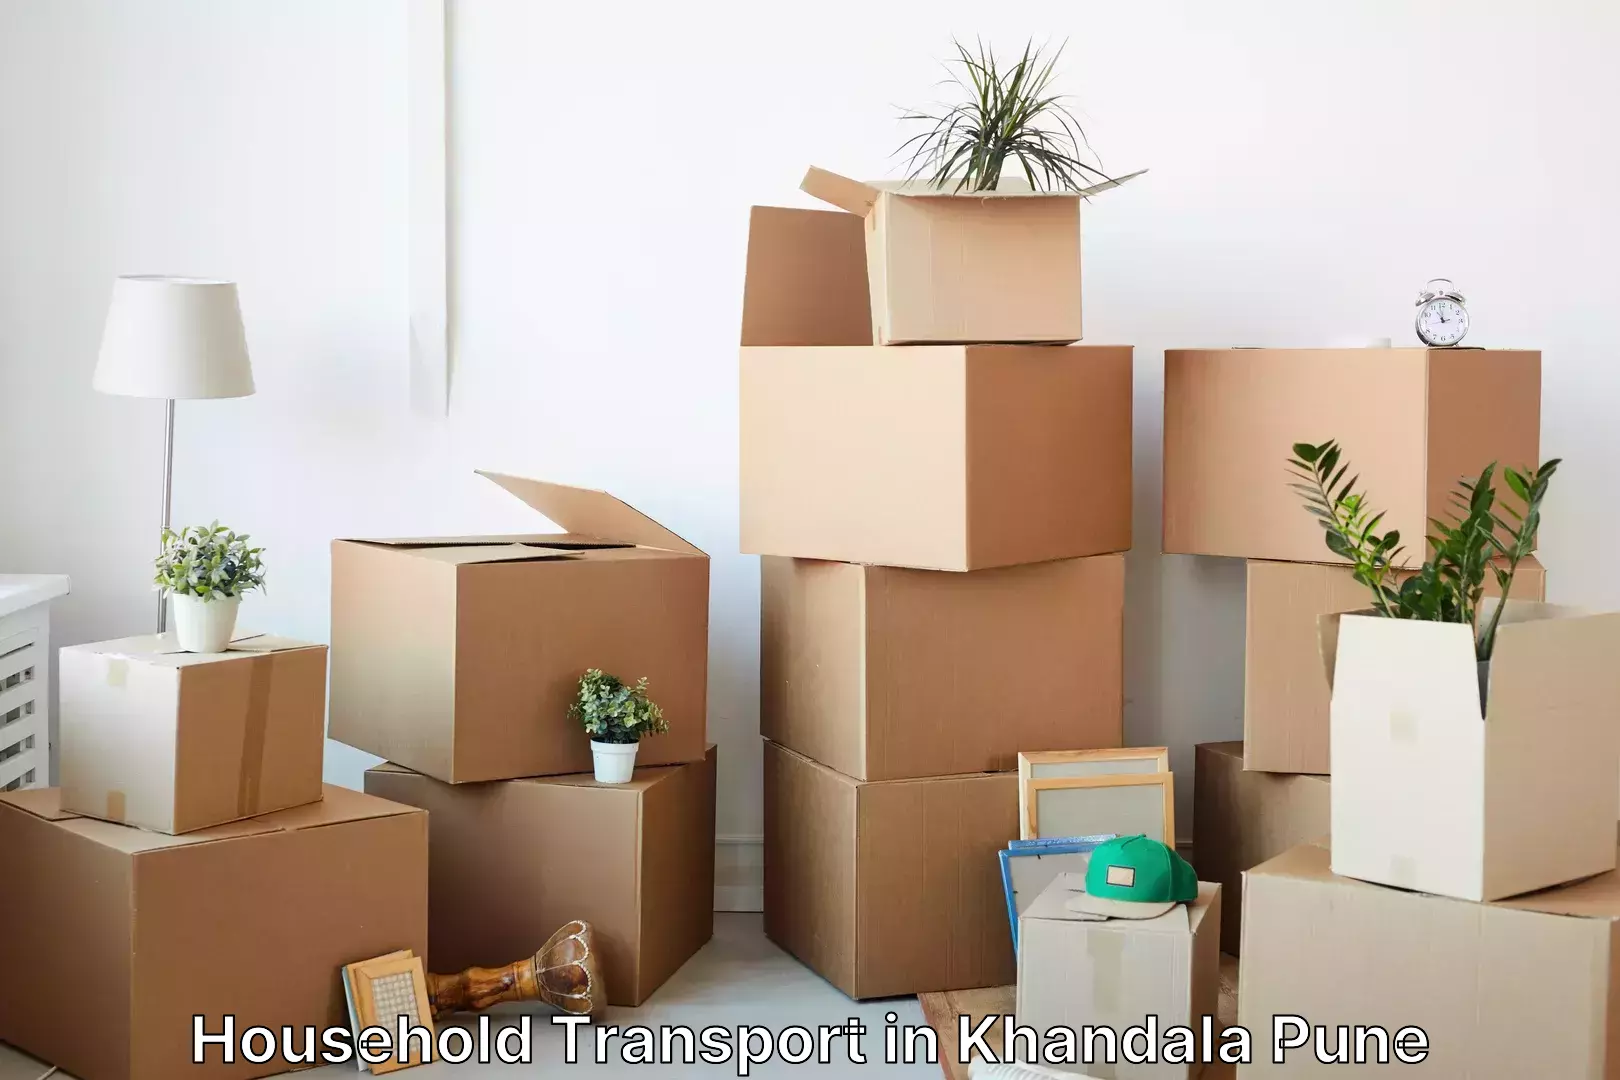 High-quality moving services in Khandala Pune